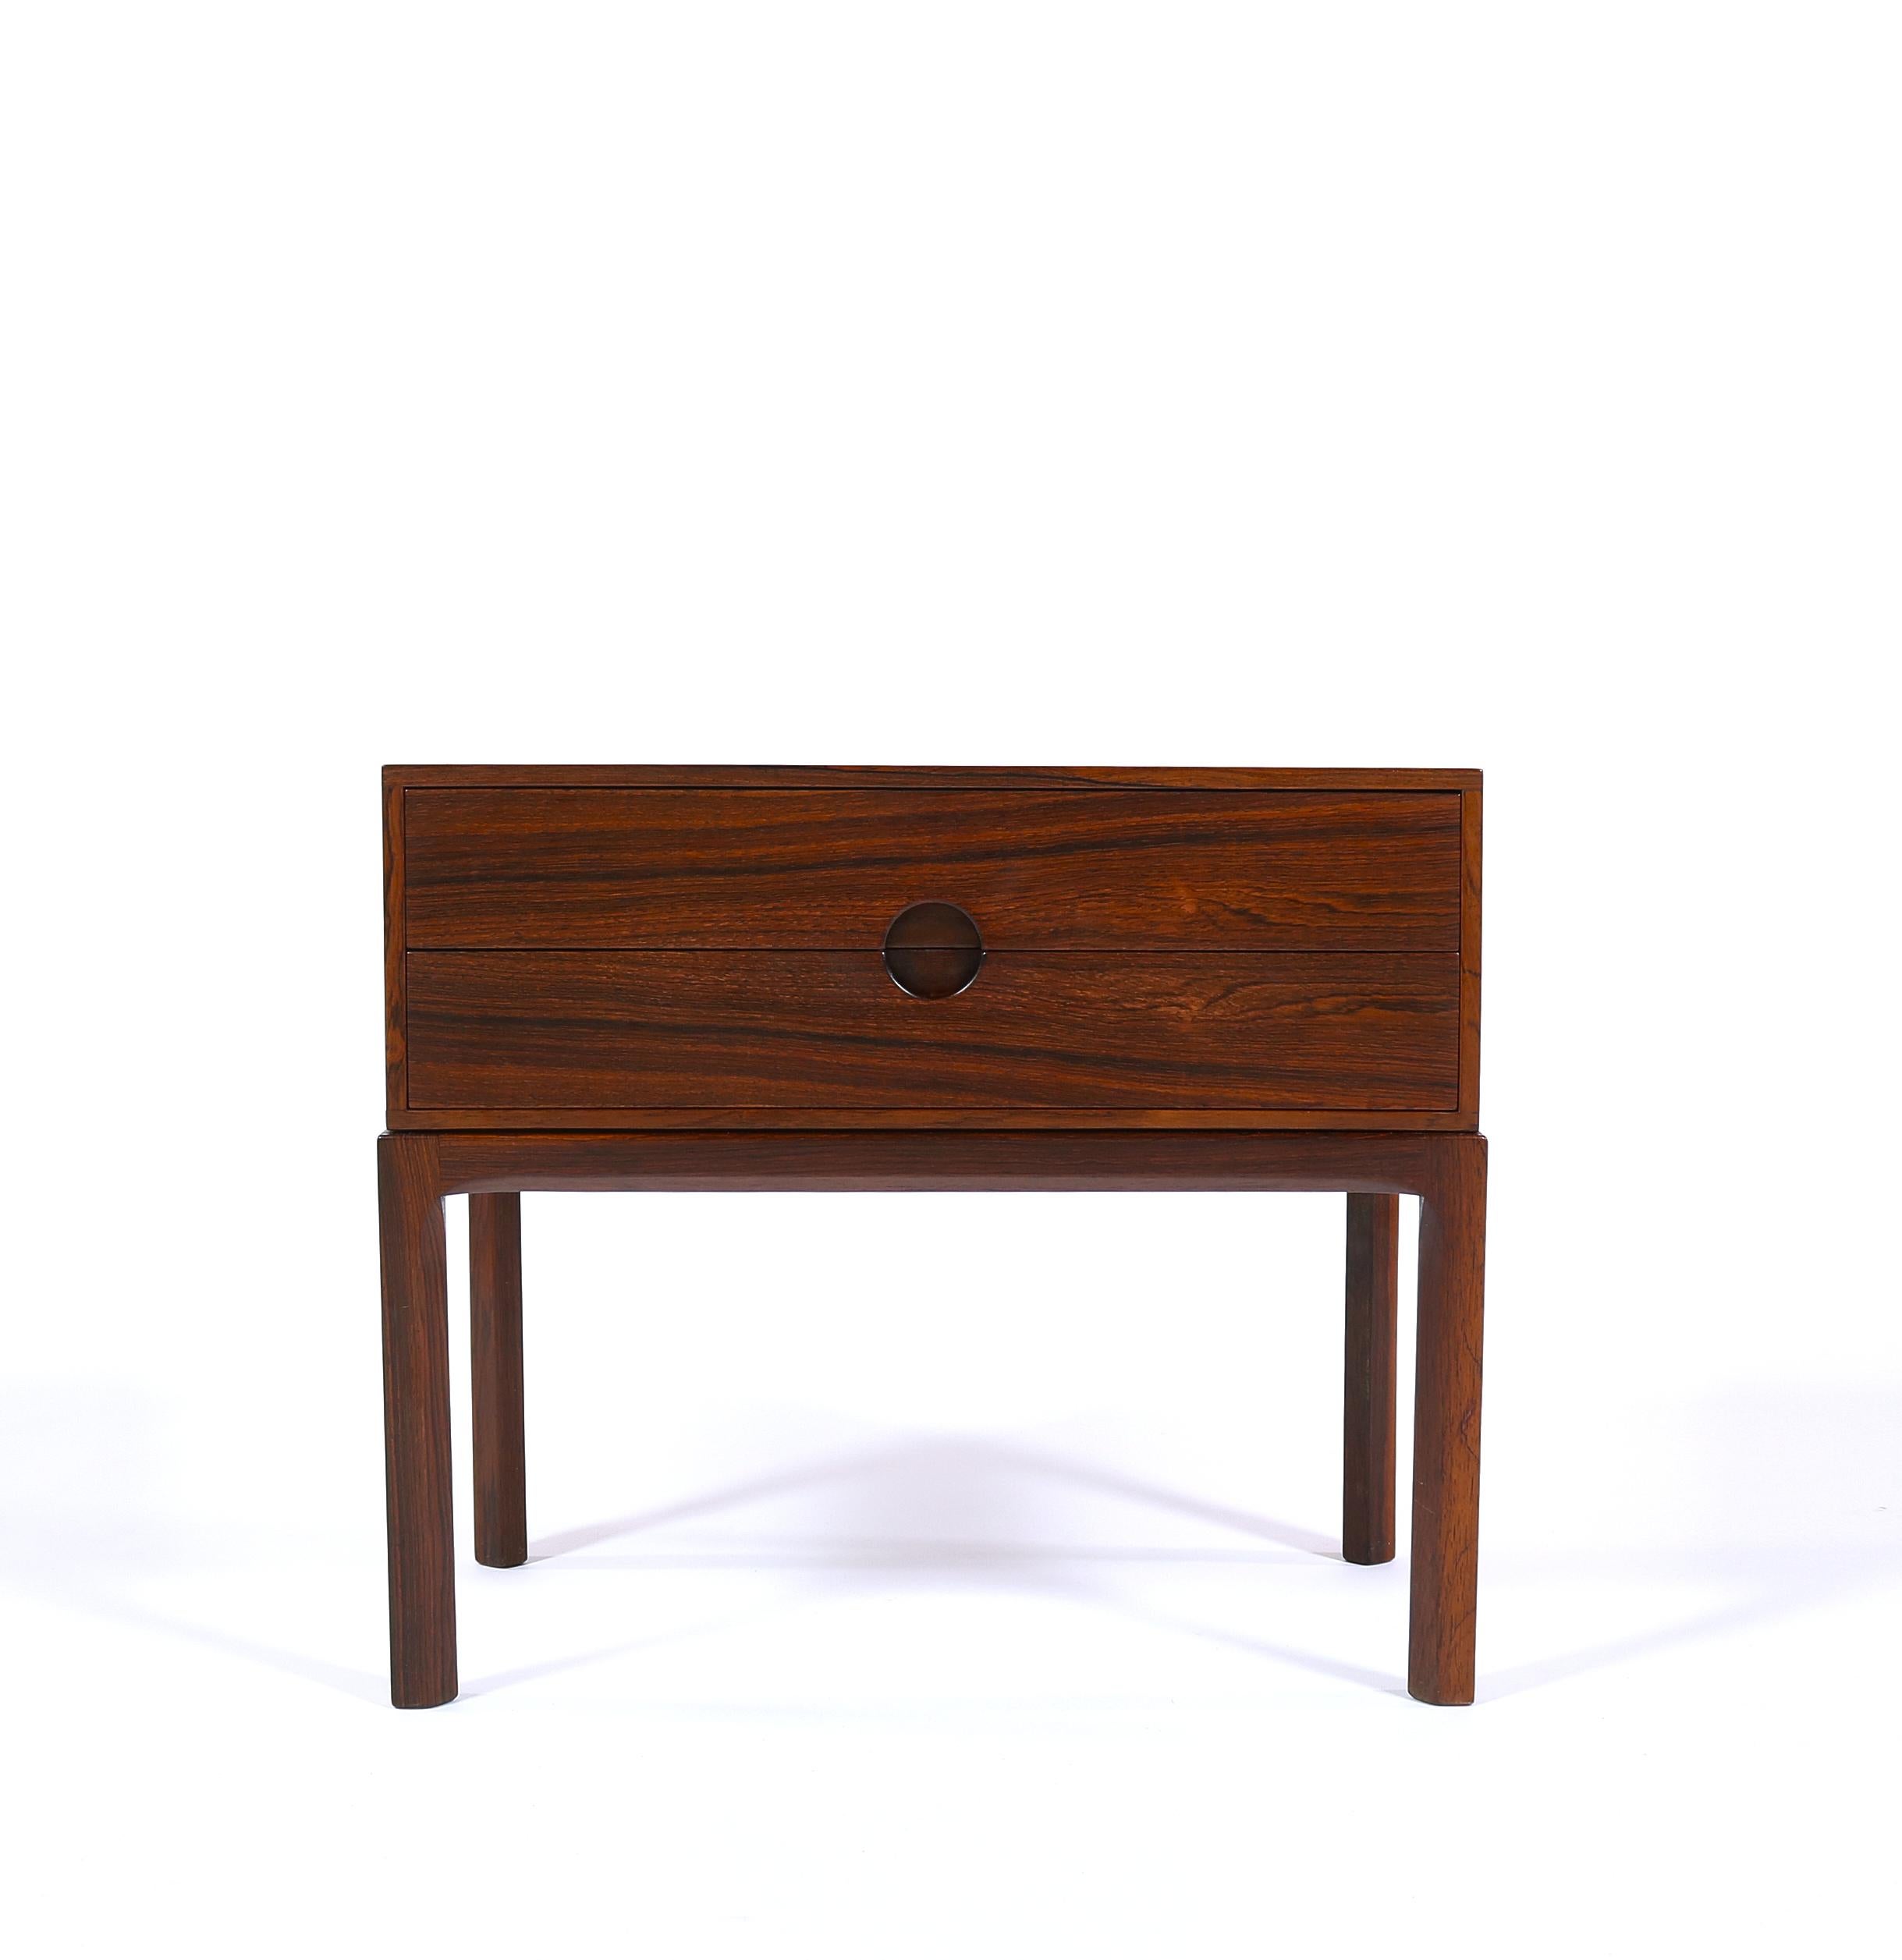 Kai Kristiansen cabinet made, circa 1960. Produced by cabinetmaker Aksel Kjaersgaard in Odder, Denmark. The cabinet has 2 drawers with Kristiansen's trademark circular drawer pull to the center. Great condition with very few signs of wear.